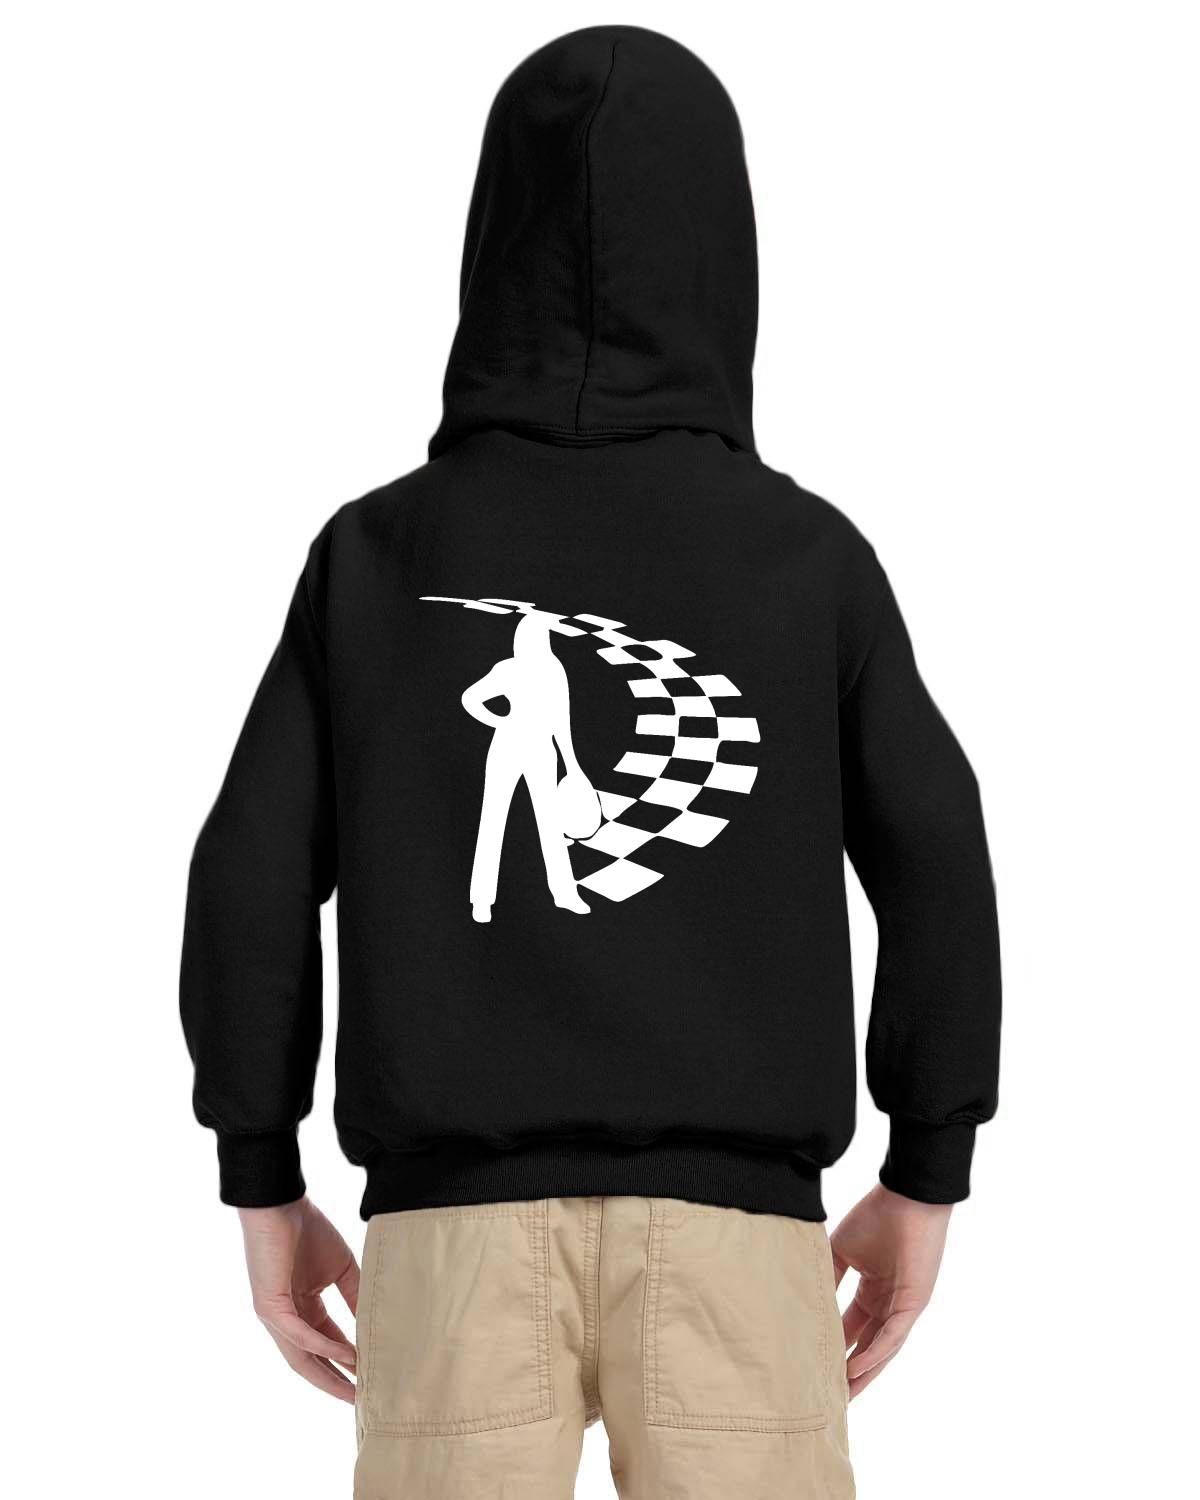 LOTO Ladies of the Oval Youth Hoodie